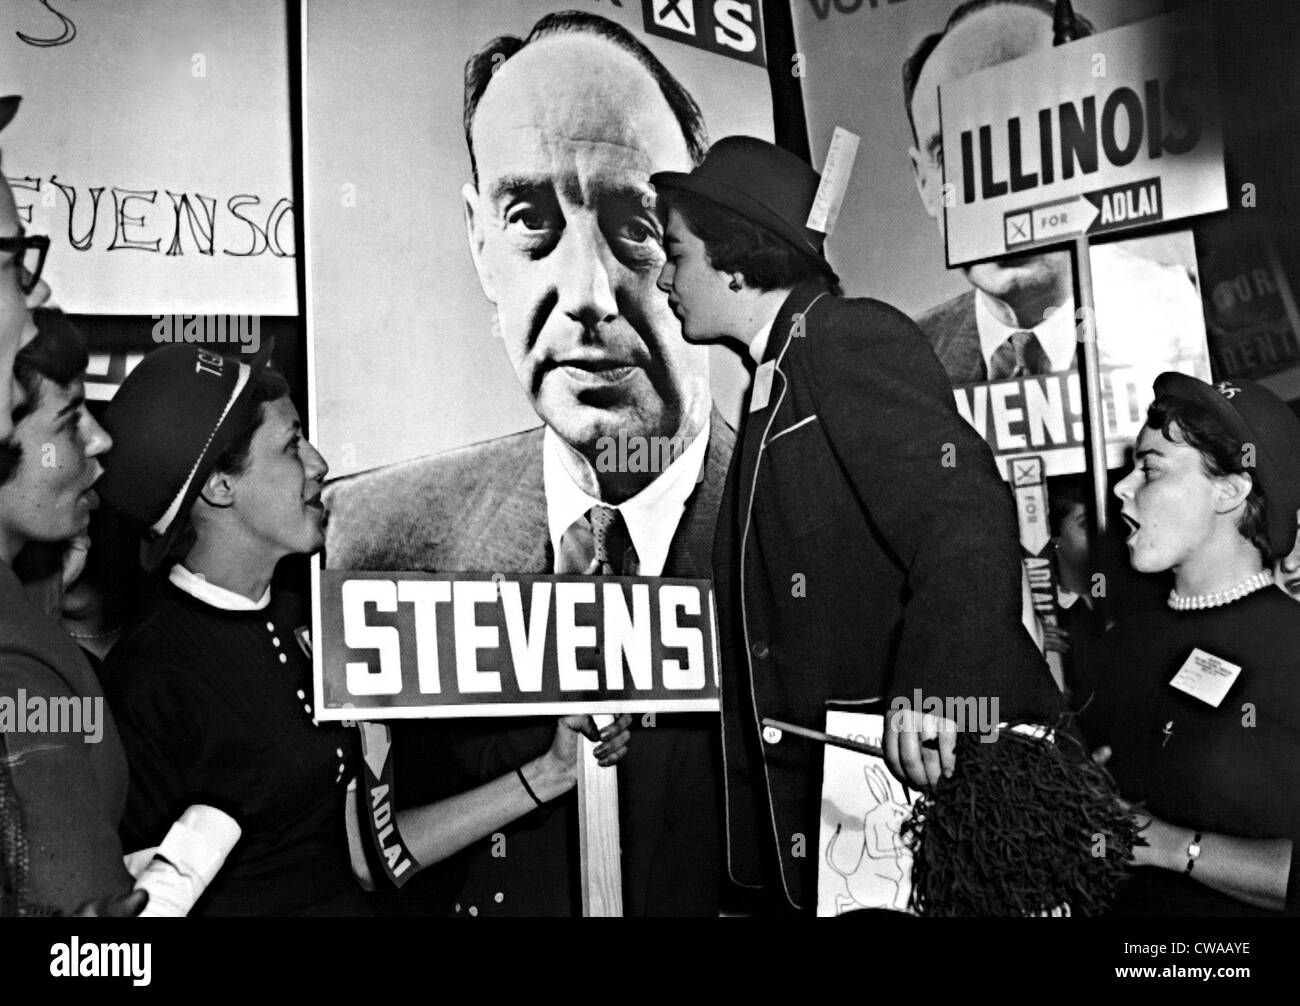 ADLAI STEVENSON, presidential candidate, is pictured on this campaign sign, which is being kissed by Betty Lonn and other Stock Photo